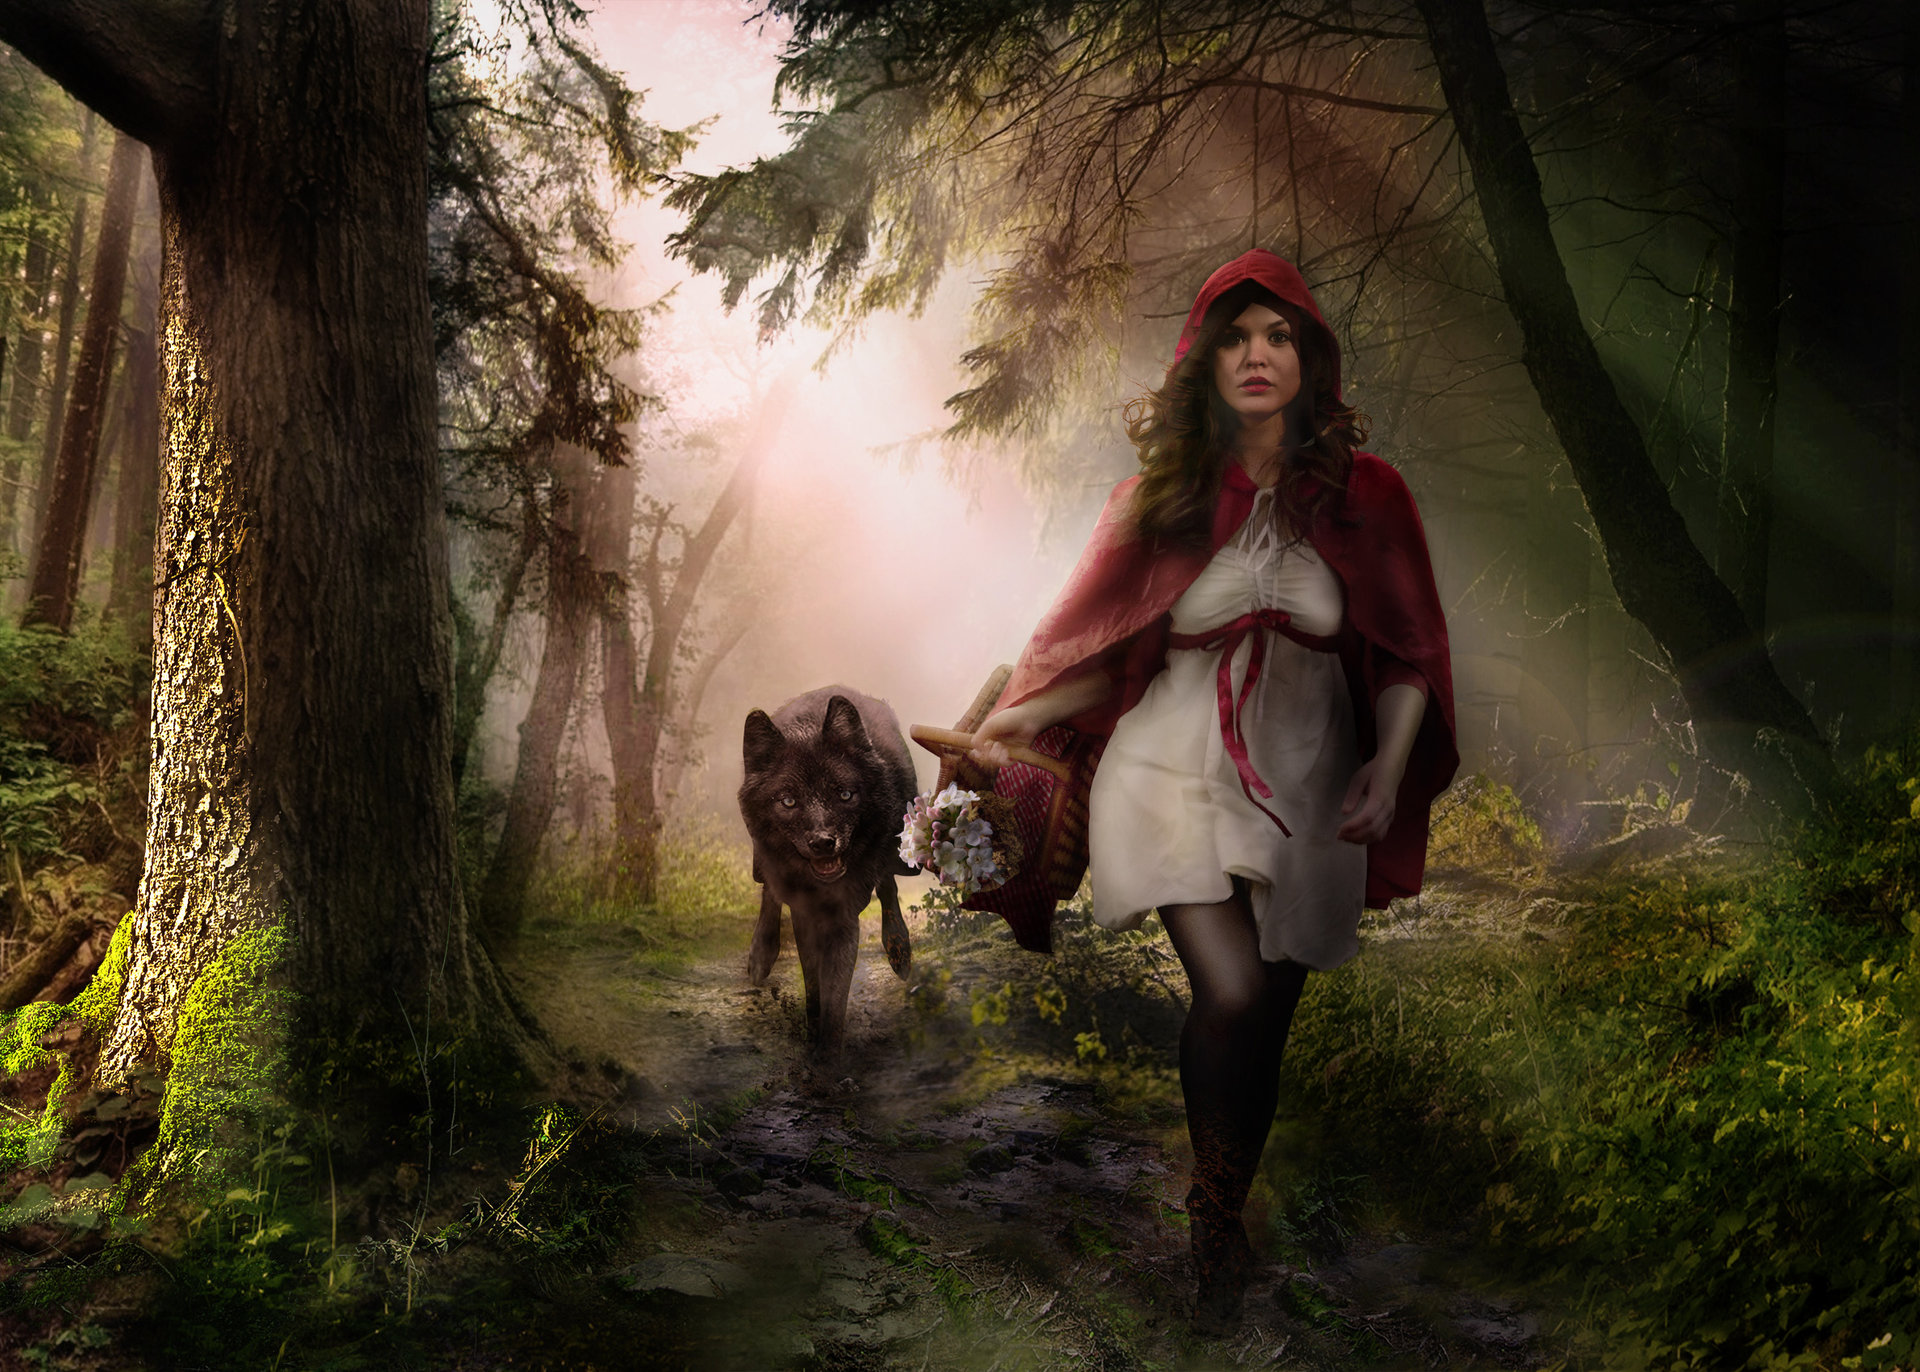 Red head riding - 🧡 HEY THERE, LITTLE RED RIDING HOOD gallery 2/12.